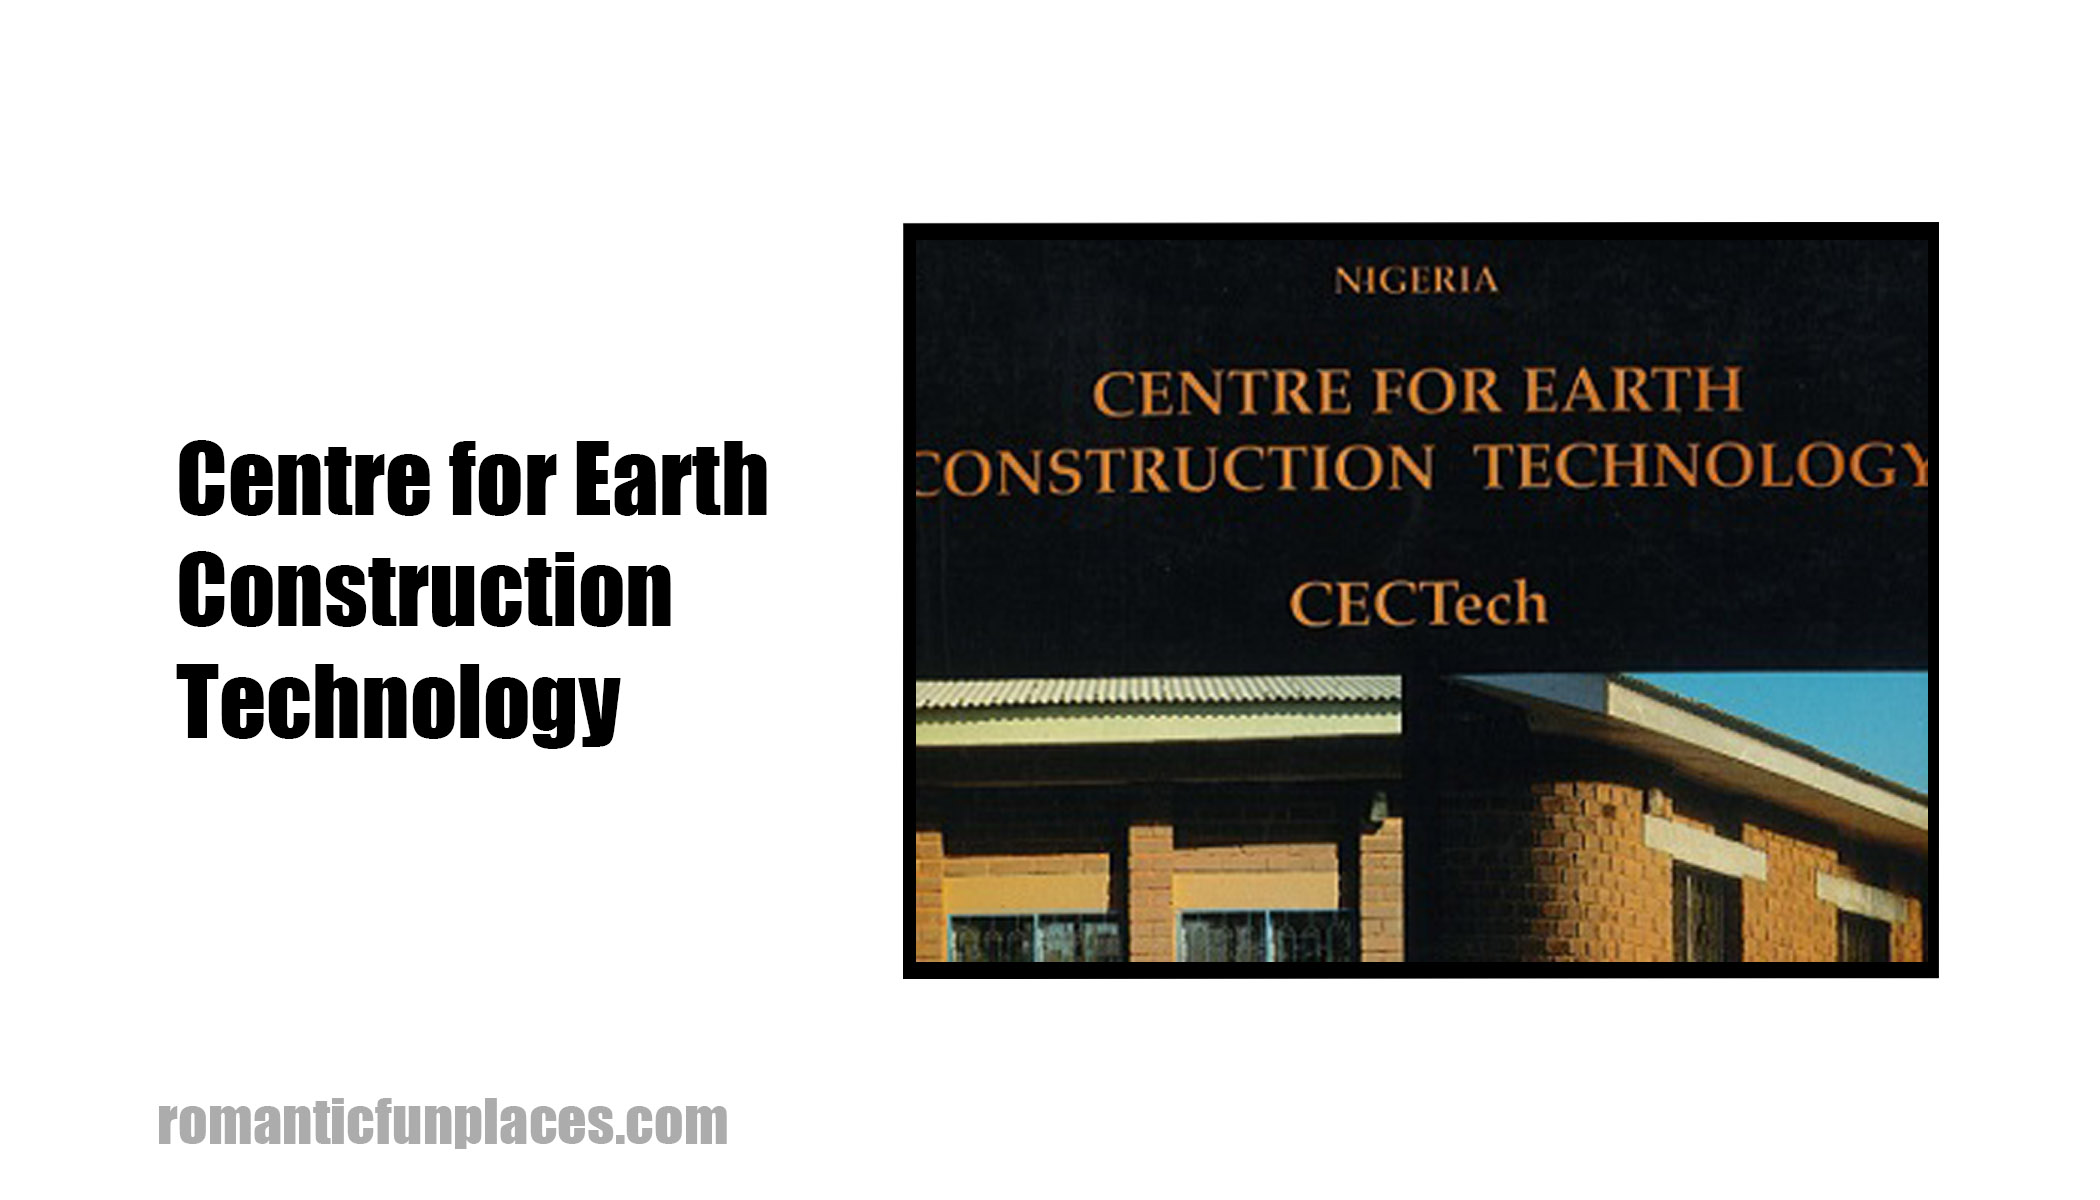 Centre for Earth Construction Technology